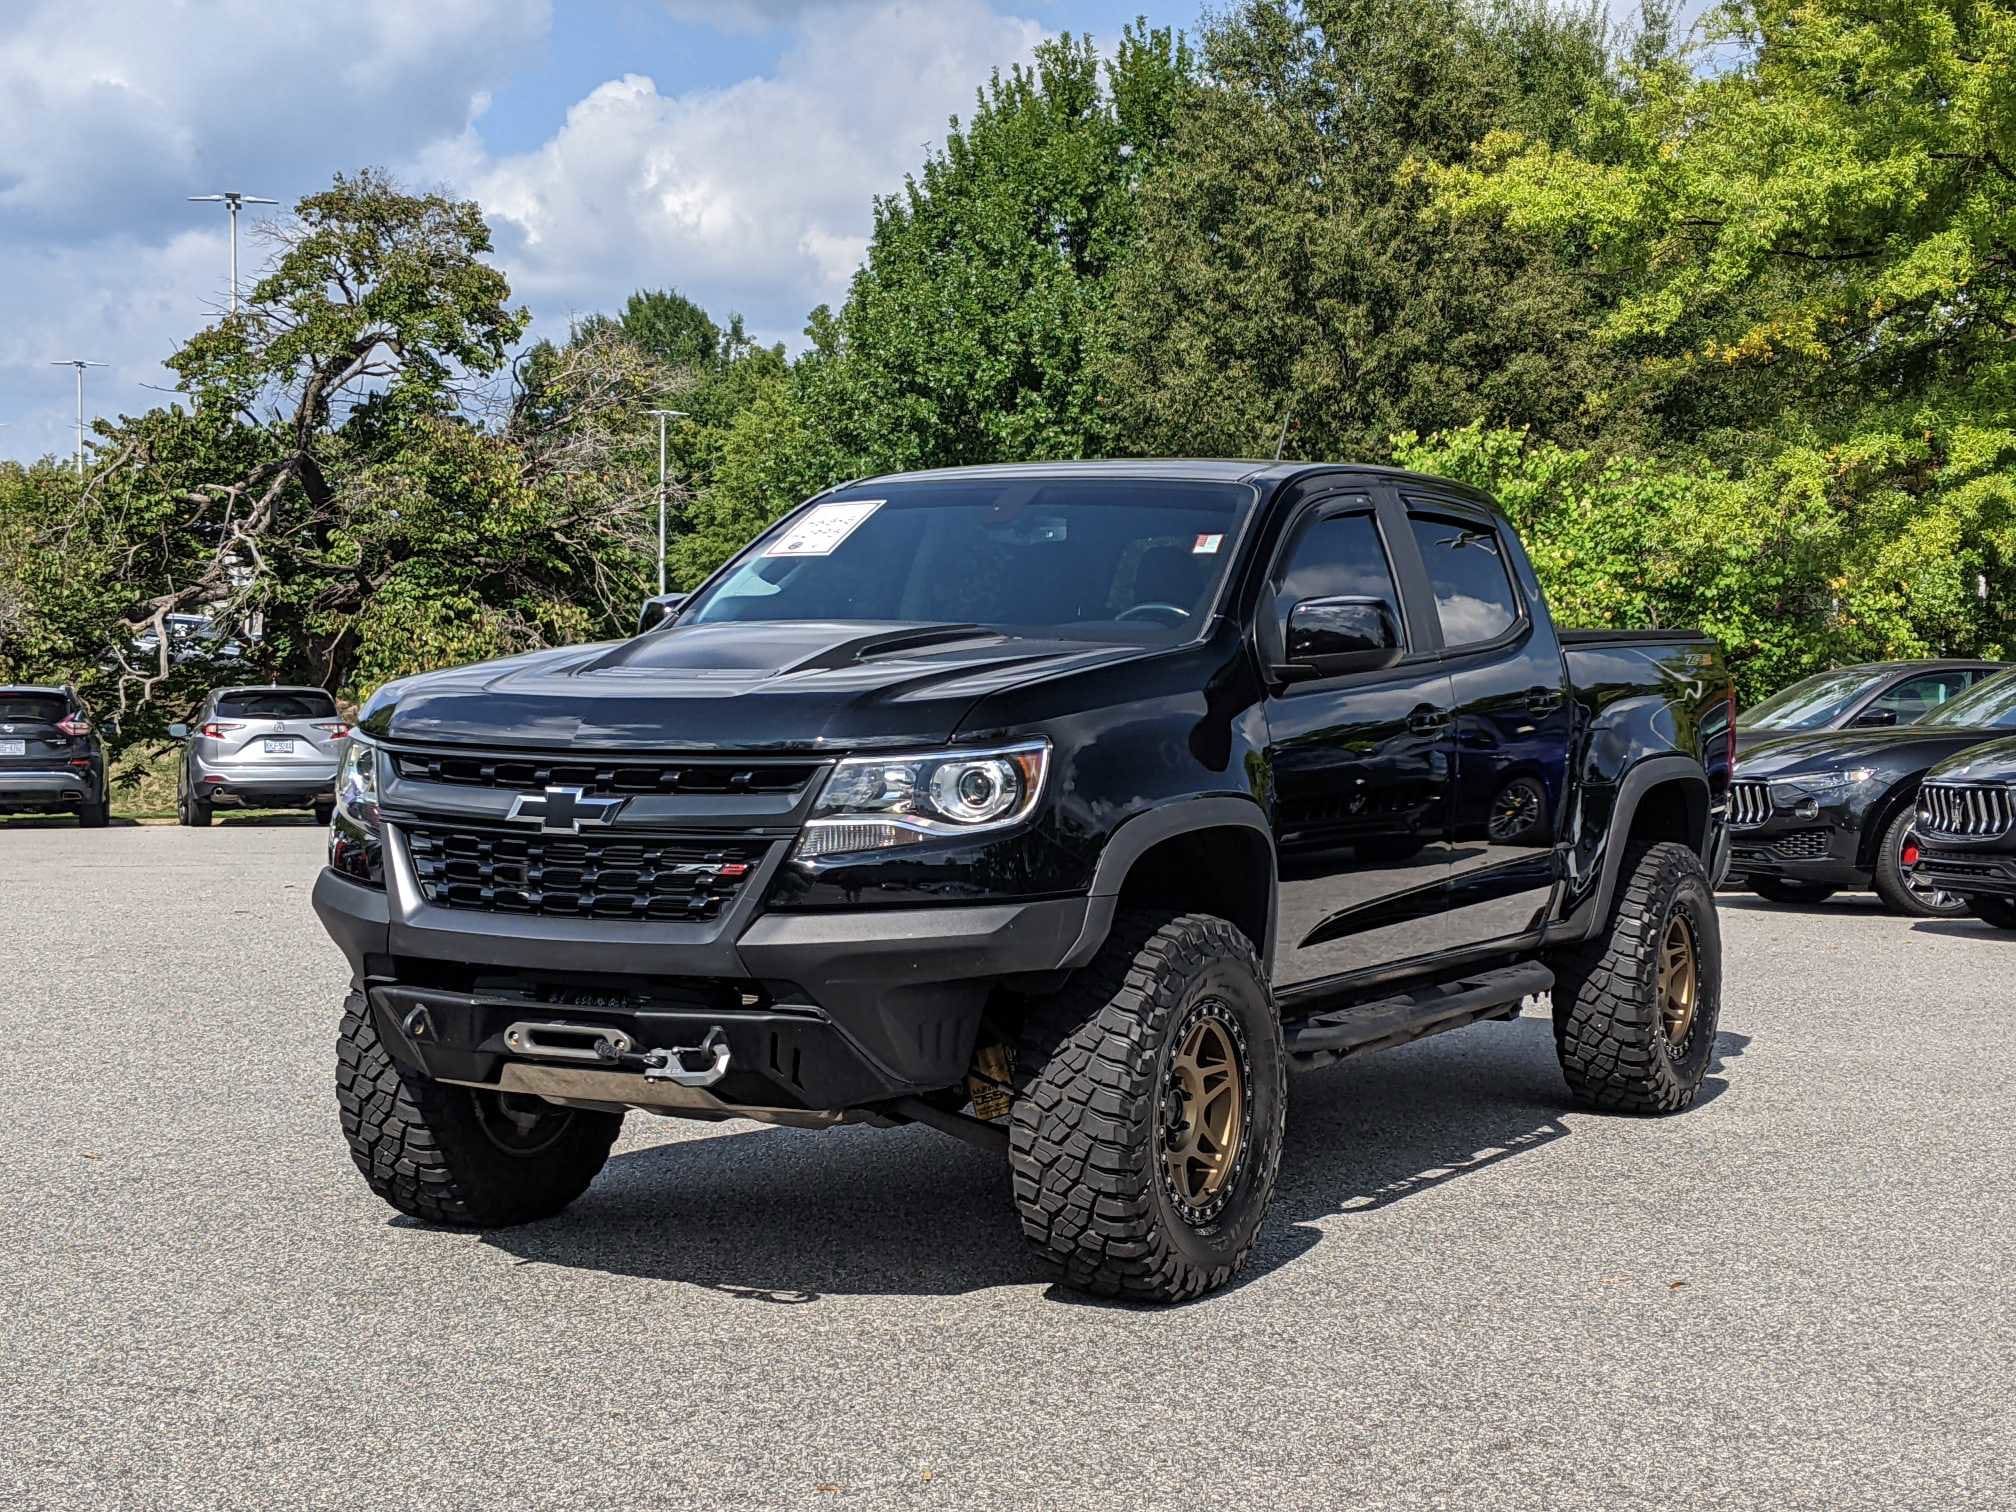 Used 2020 Chevrolet Colorado For Sale in Cary NC near Raleigh, Chapel Hill   Durham 1GCGTEEN9L1239990